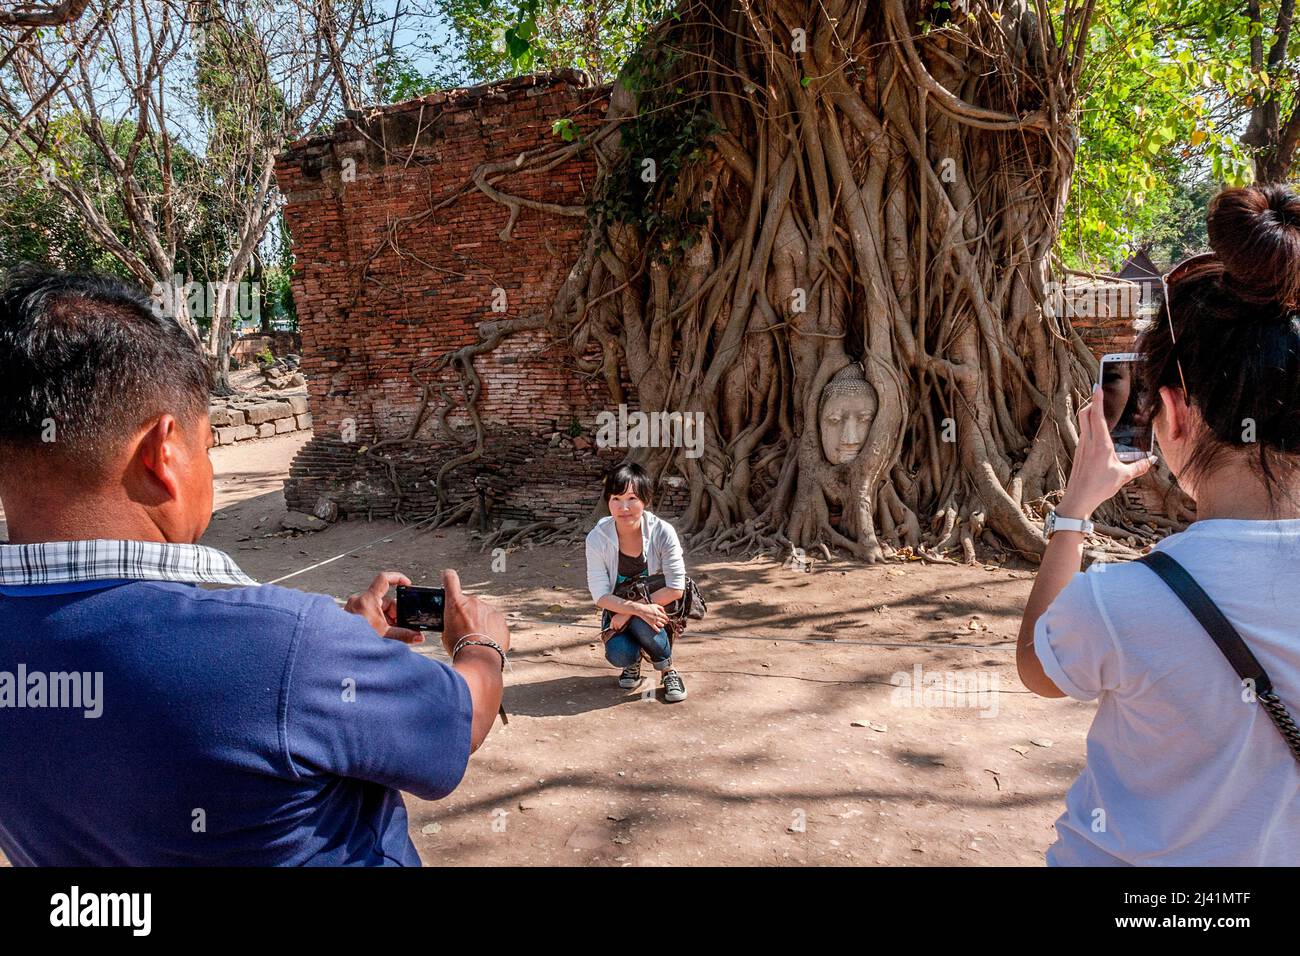 Tourists love to have their pictures taken in front of the buddha head in the tree. Stock Photo